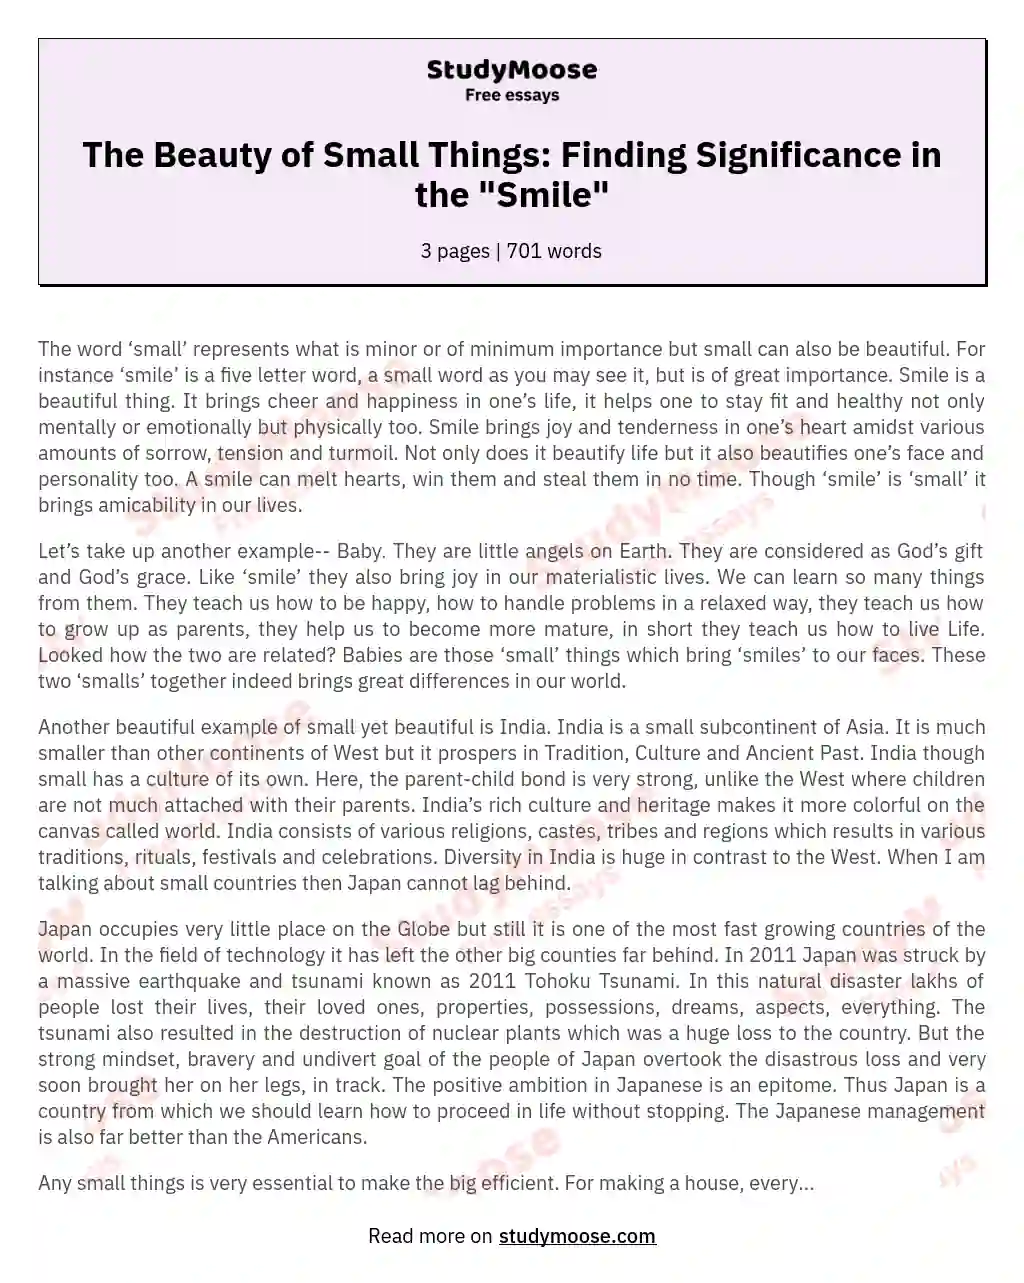 The Beauty of Small Things: Finding Significance in the "Smile" essay